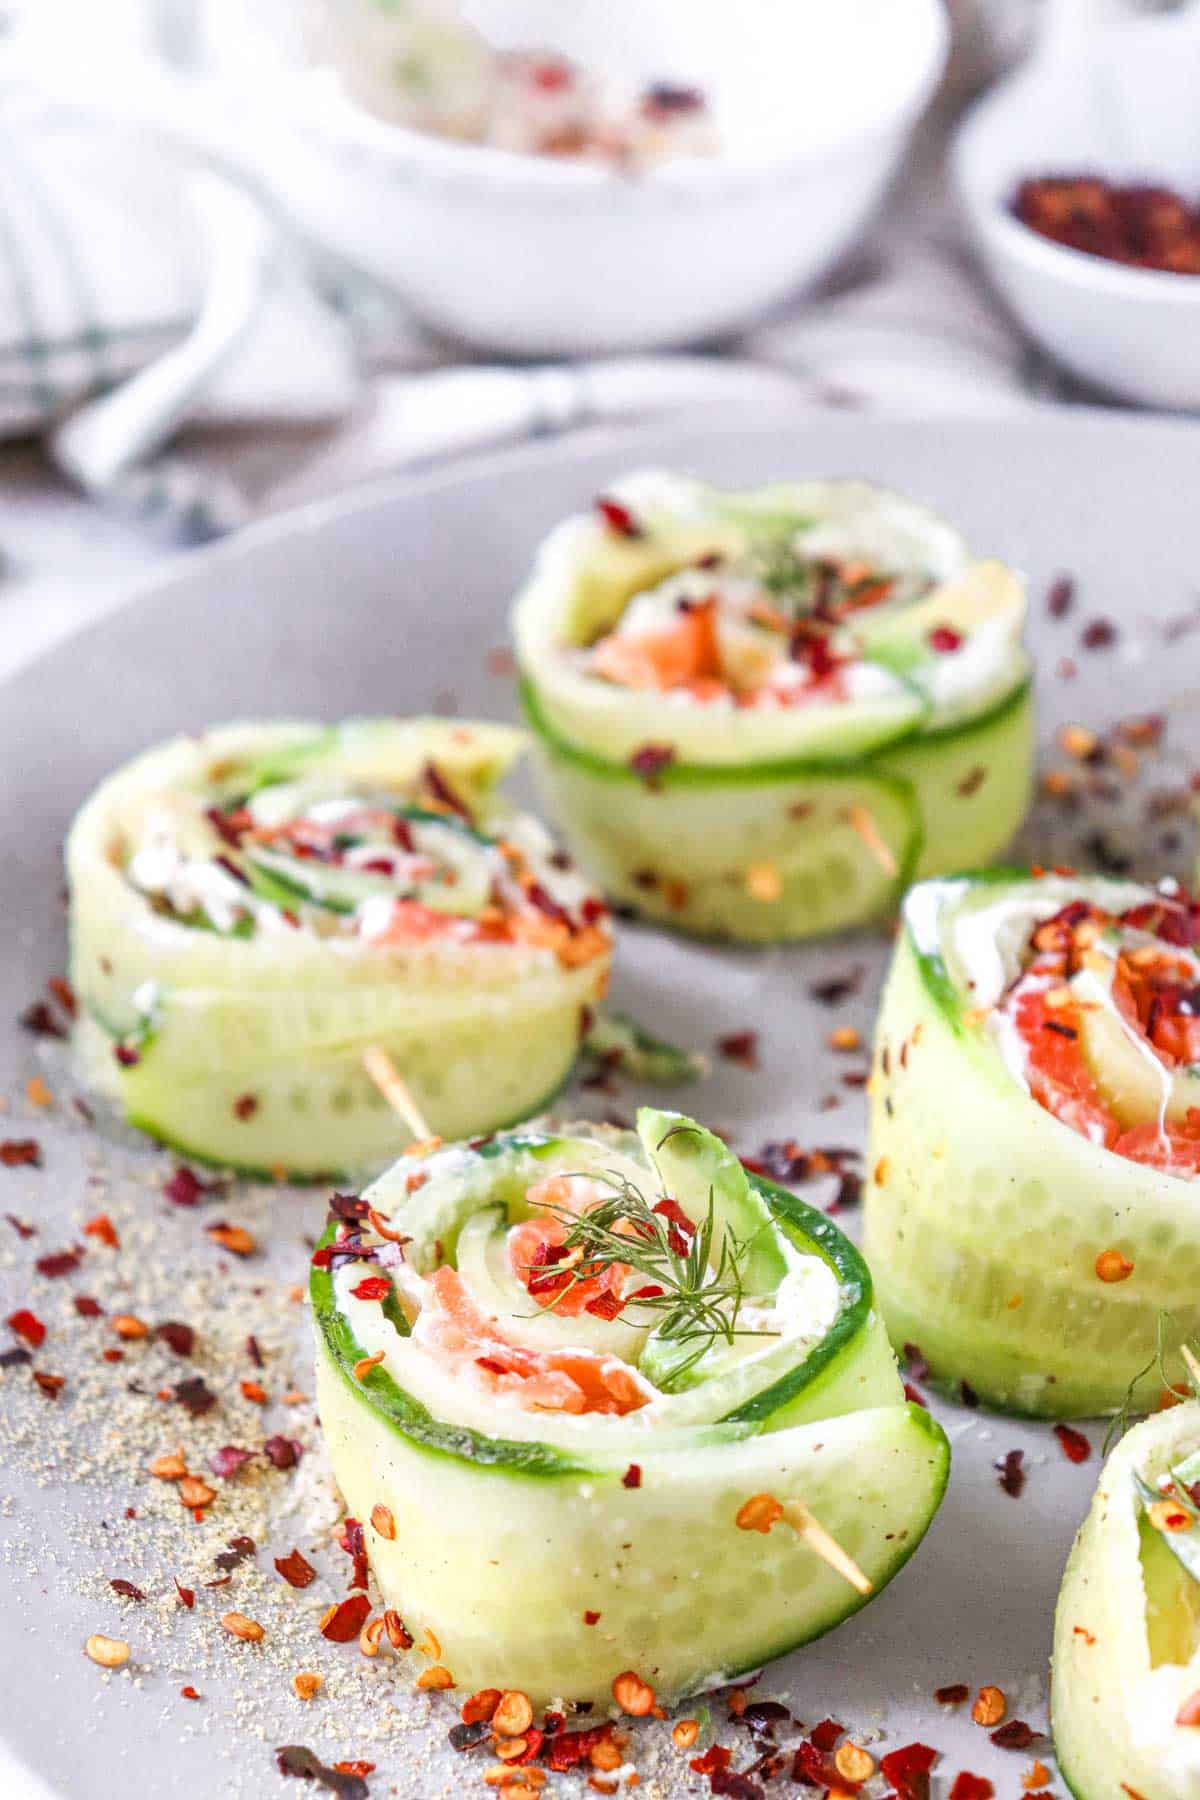 Cucumber rolls filled with cream cheese, smoked salmon, and dill, sprinkled with spices on a white plate.